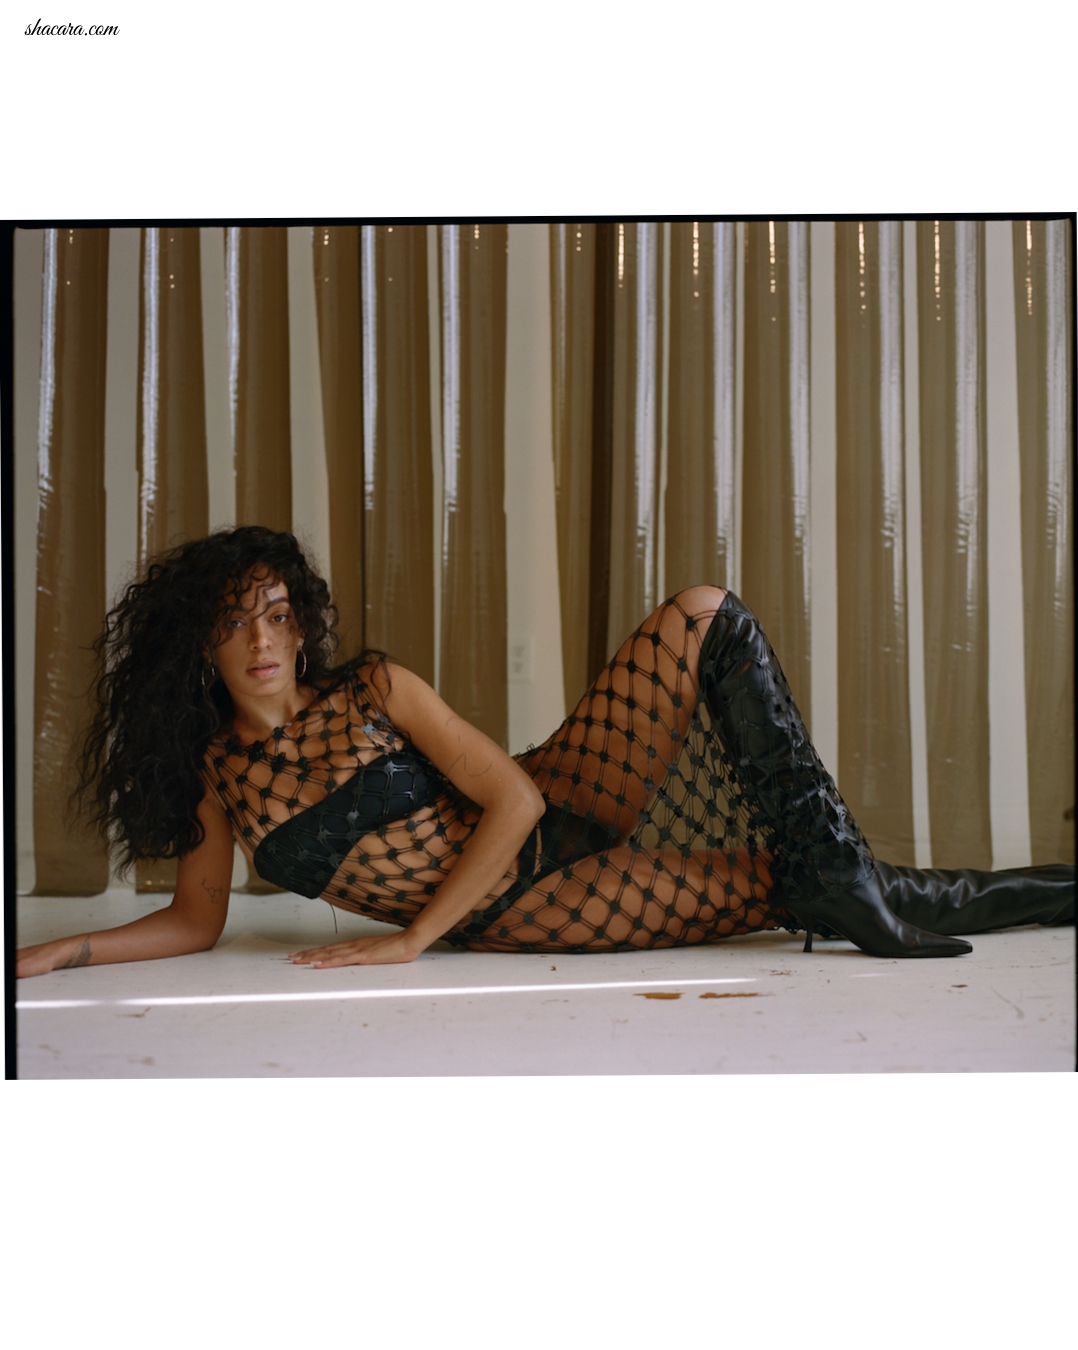 Solange Is Blazing Hot On The Tenth Issue Of Office Magazine